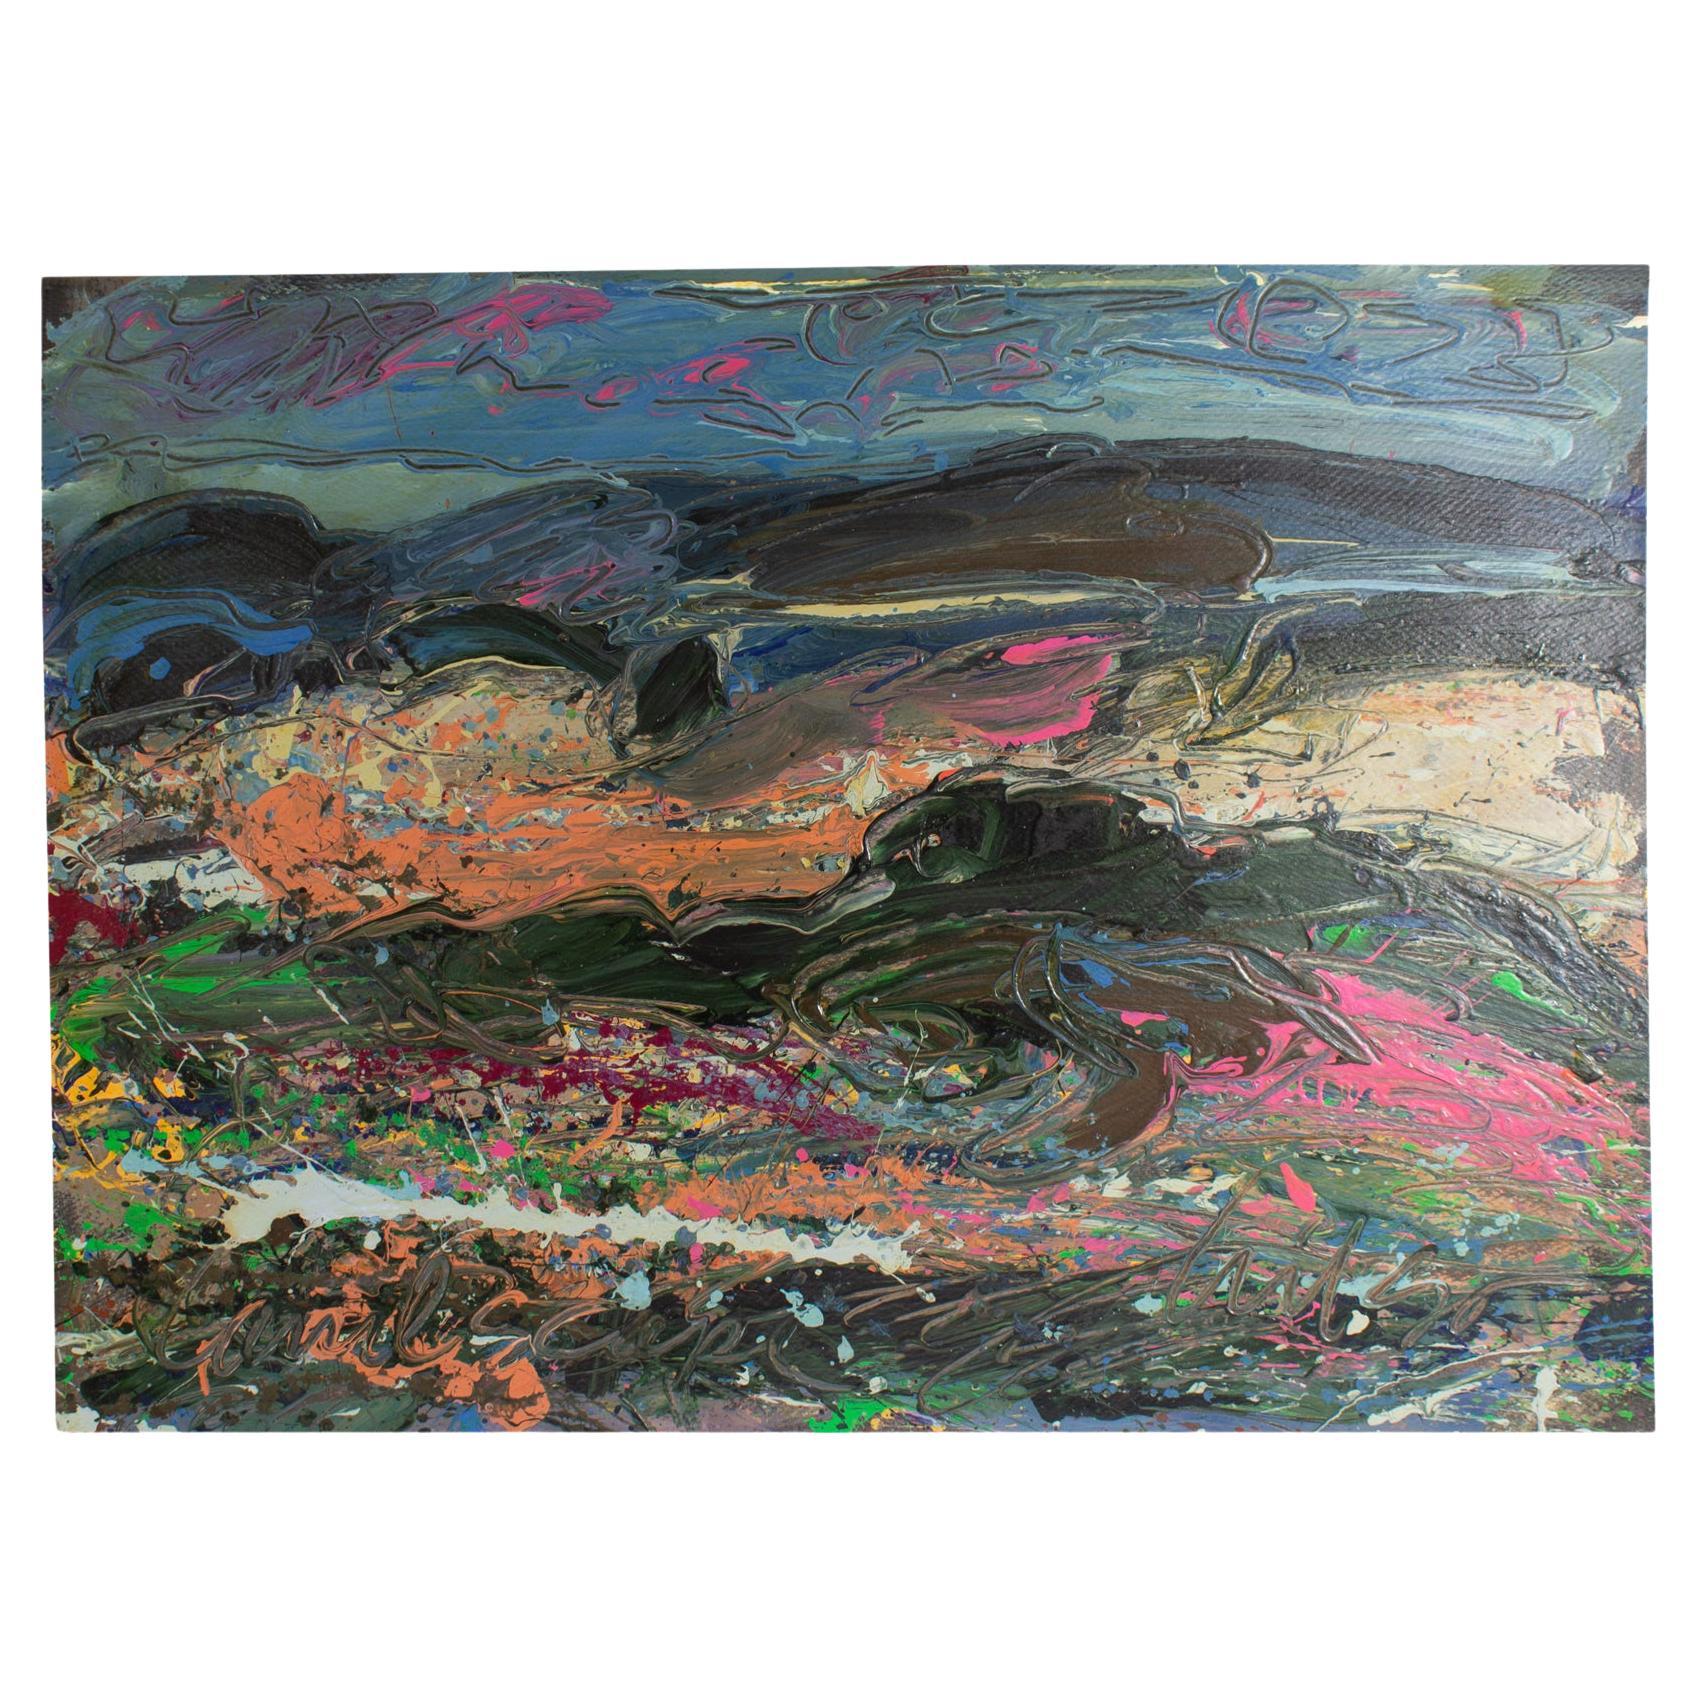 Harry Hilson Signed 1980s “Landscape” Abstract Acrylic on Paper Painting For Sale